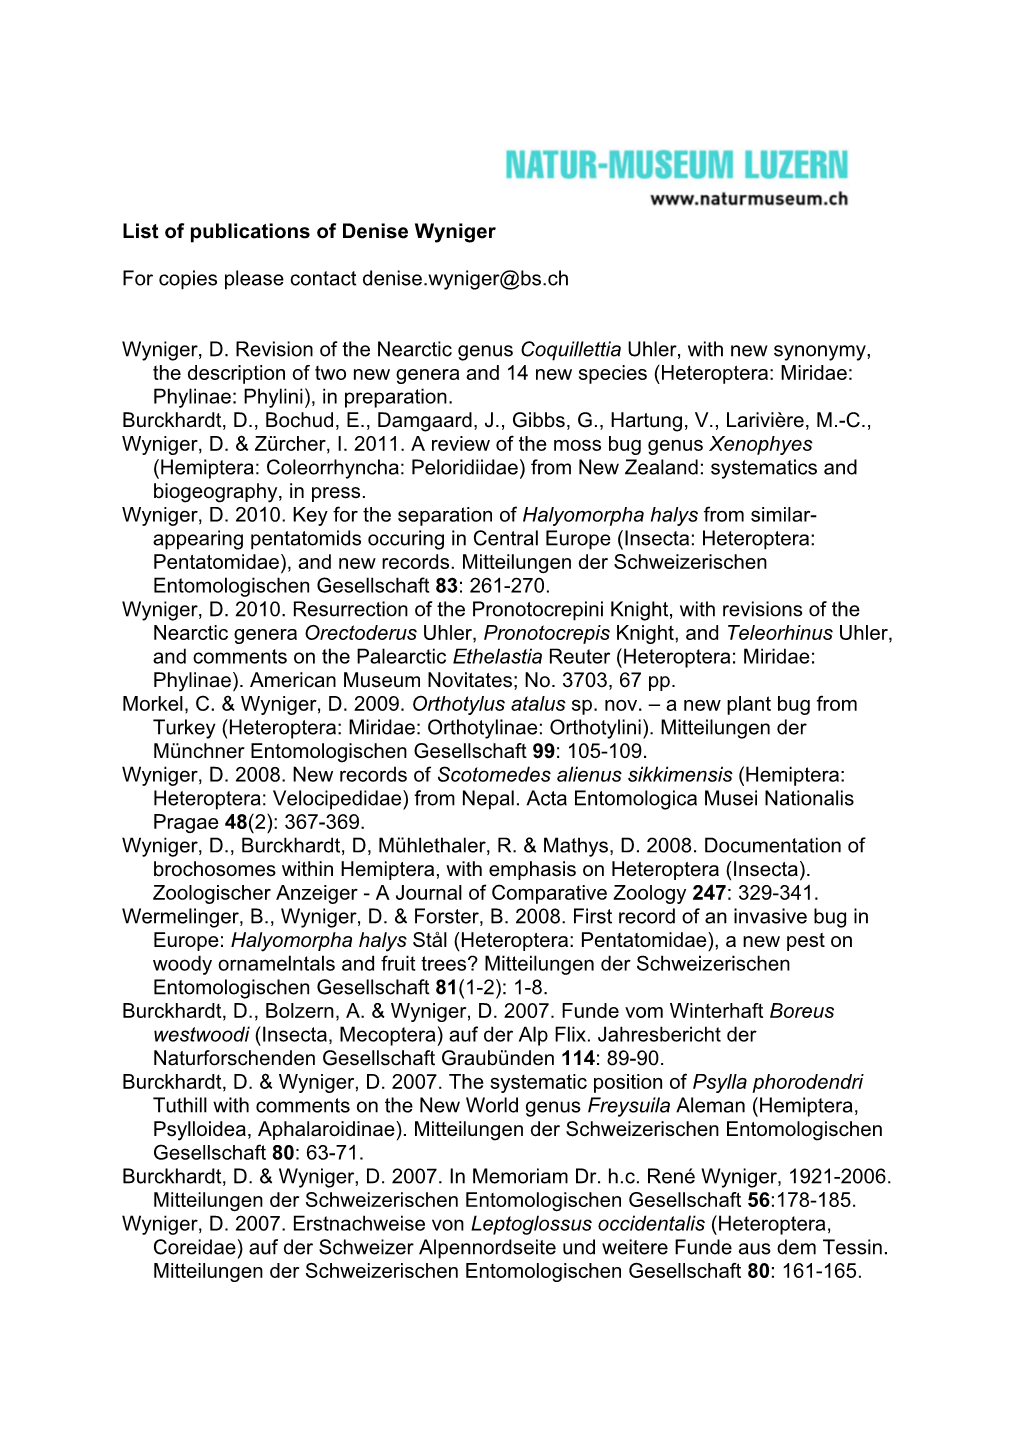 List of Publications of Denise Wyniger